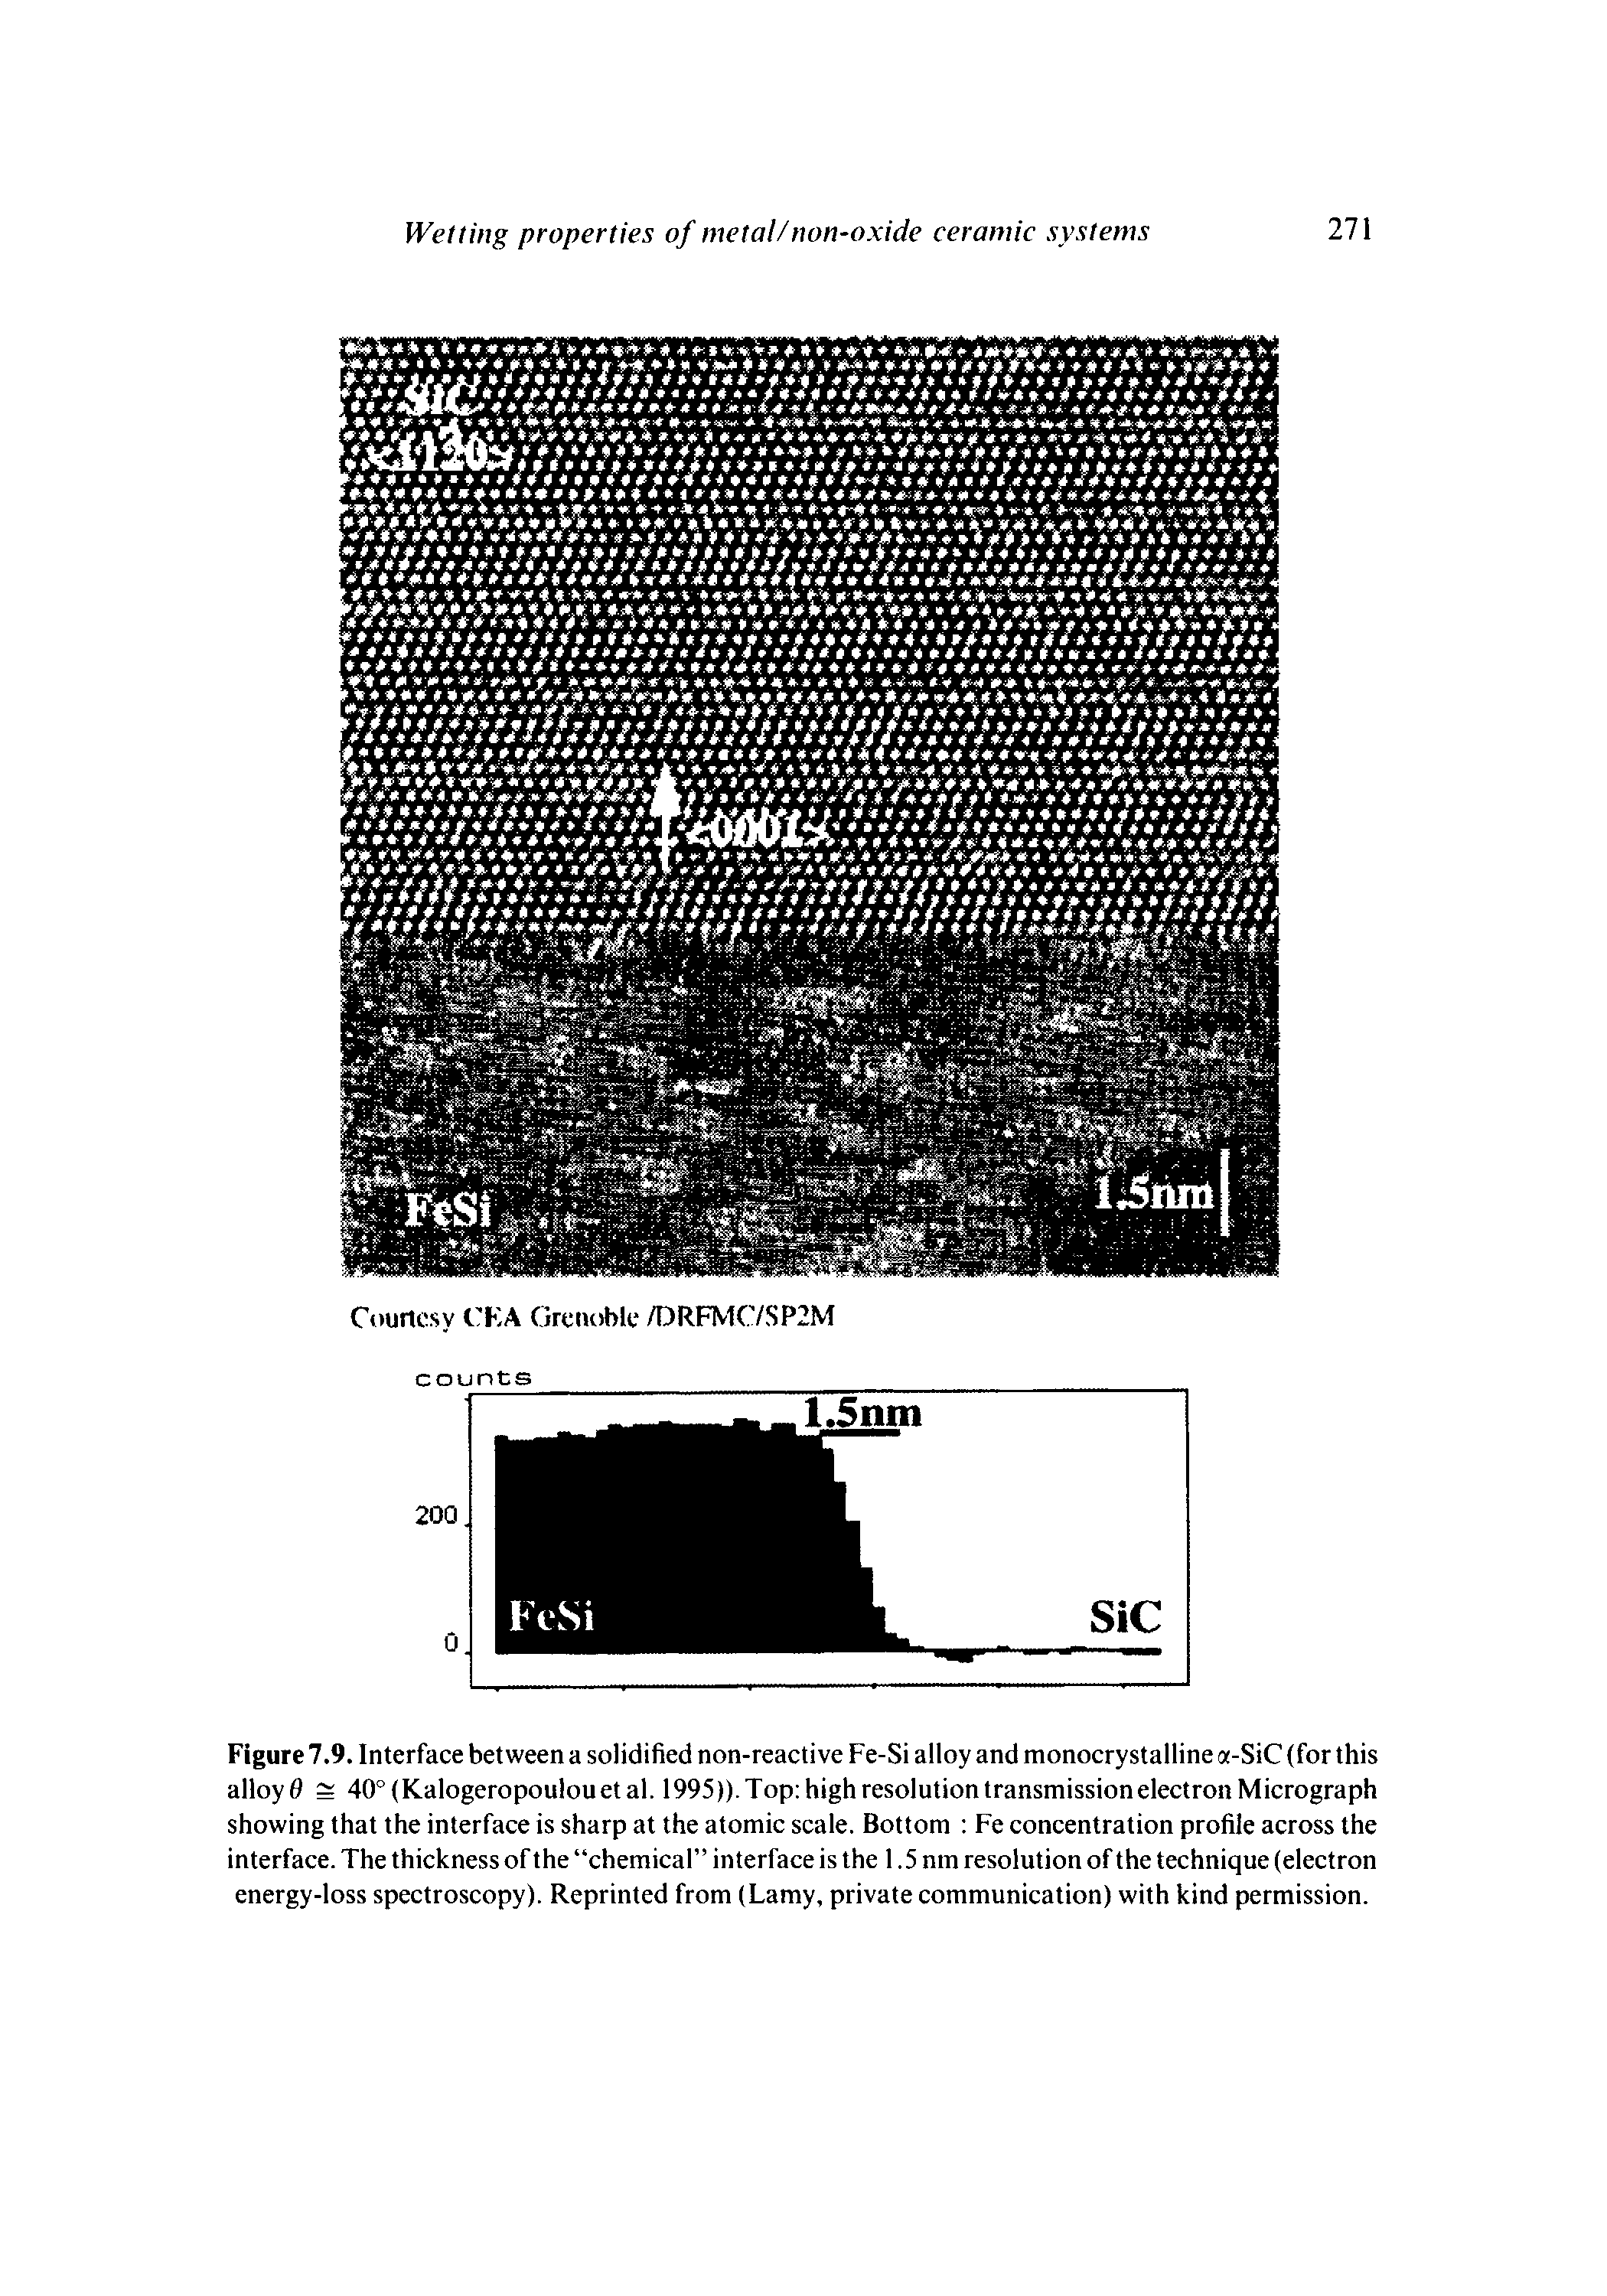 Figure 7.9. Interface between a solidified non-reactive Fe-Si alloy and monocrystalline a-SiC (for this alloyd 40°(Kalogeropoulouetal. 1995)). Top high resolution transmission electron Micrograph showing that the interface is sharp at the atomic scale. Bottom Fe concentration profile across the interface. The thickness of the chemical interface is the 1.5 nm resolution of the technique (electron energy-loss spectroscopy). Reprinted from (Lamy, private communication) with kind permission.